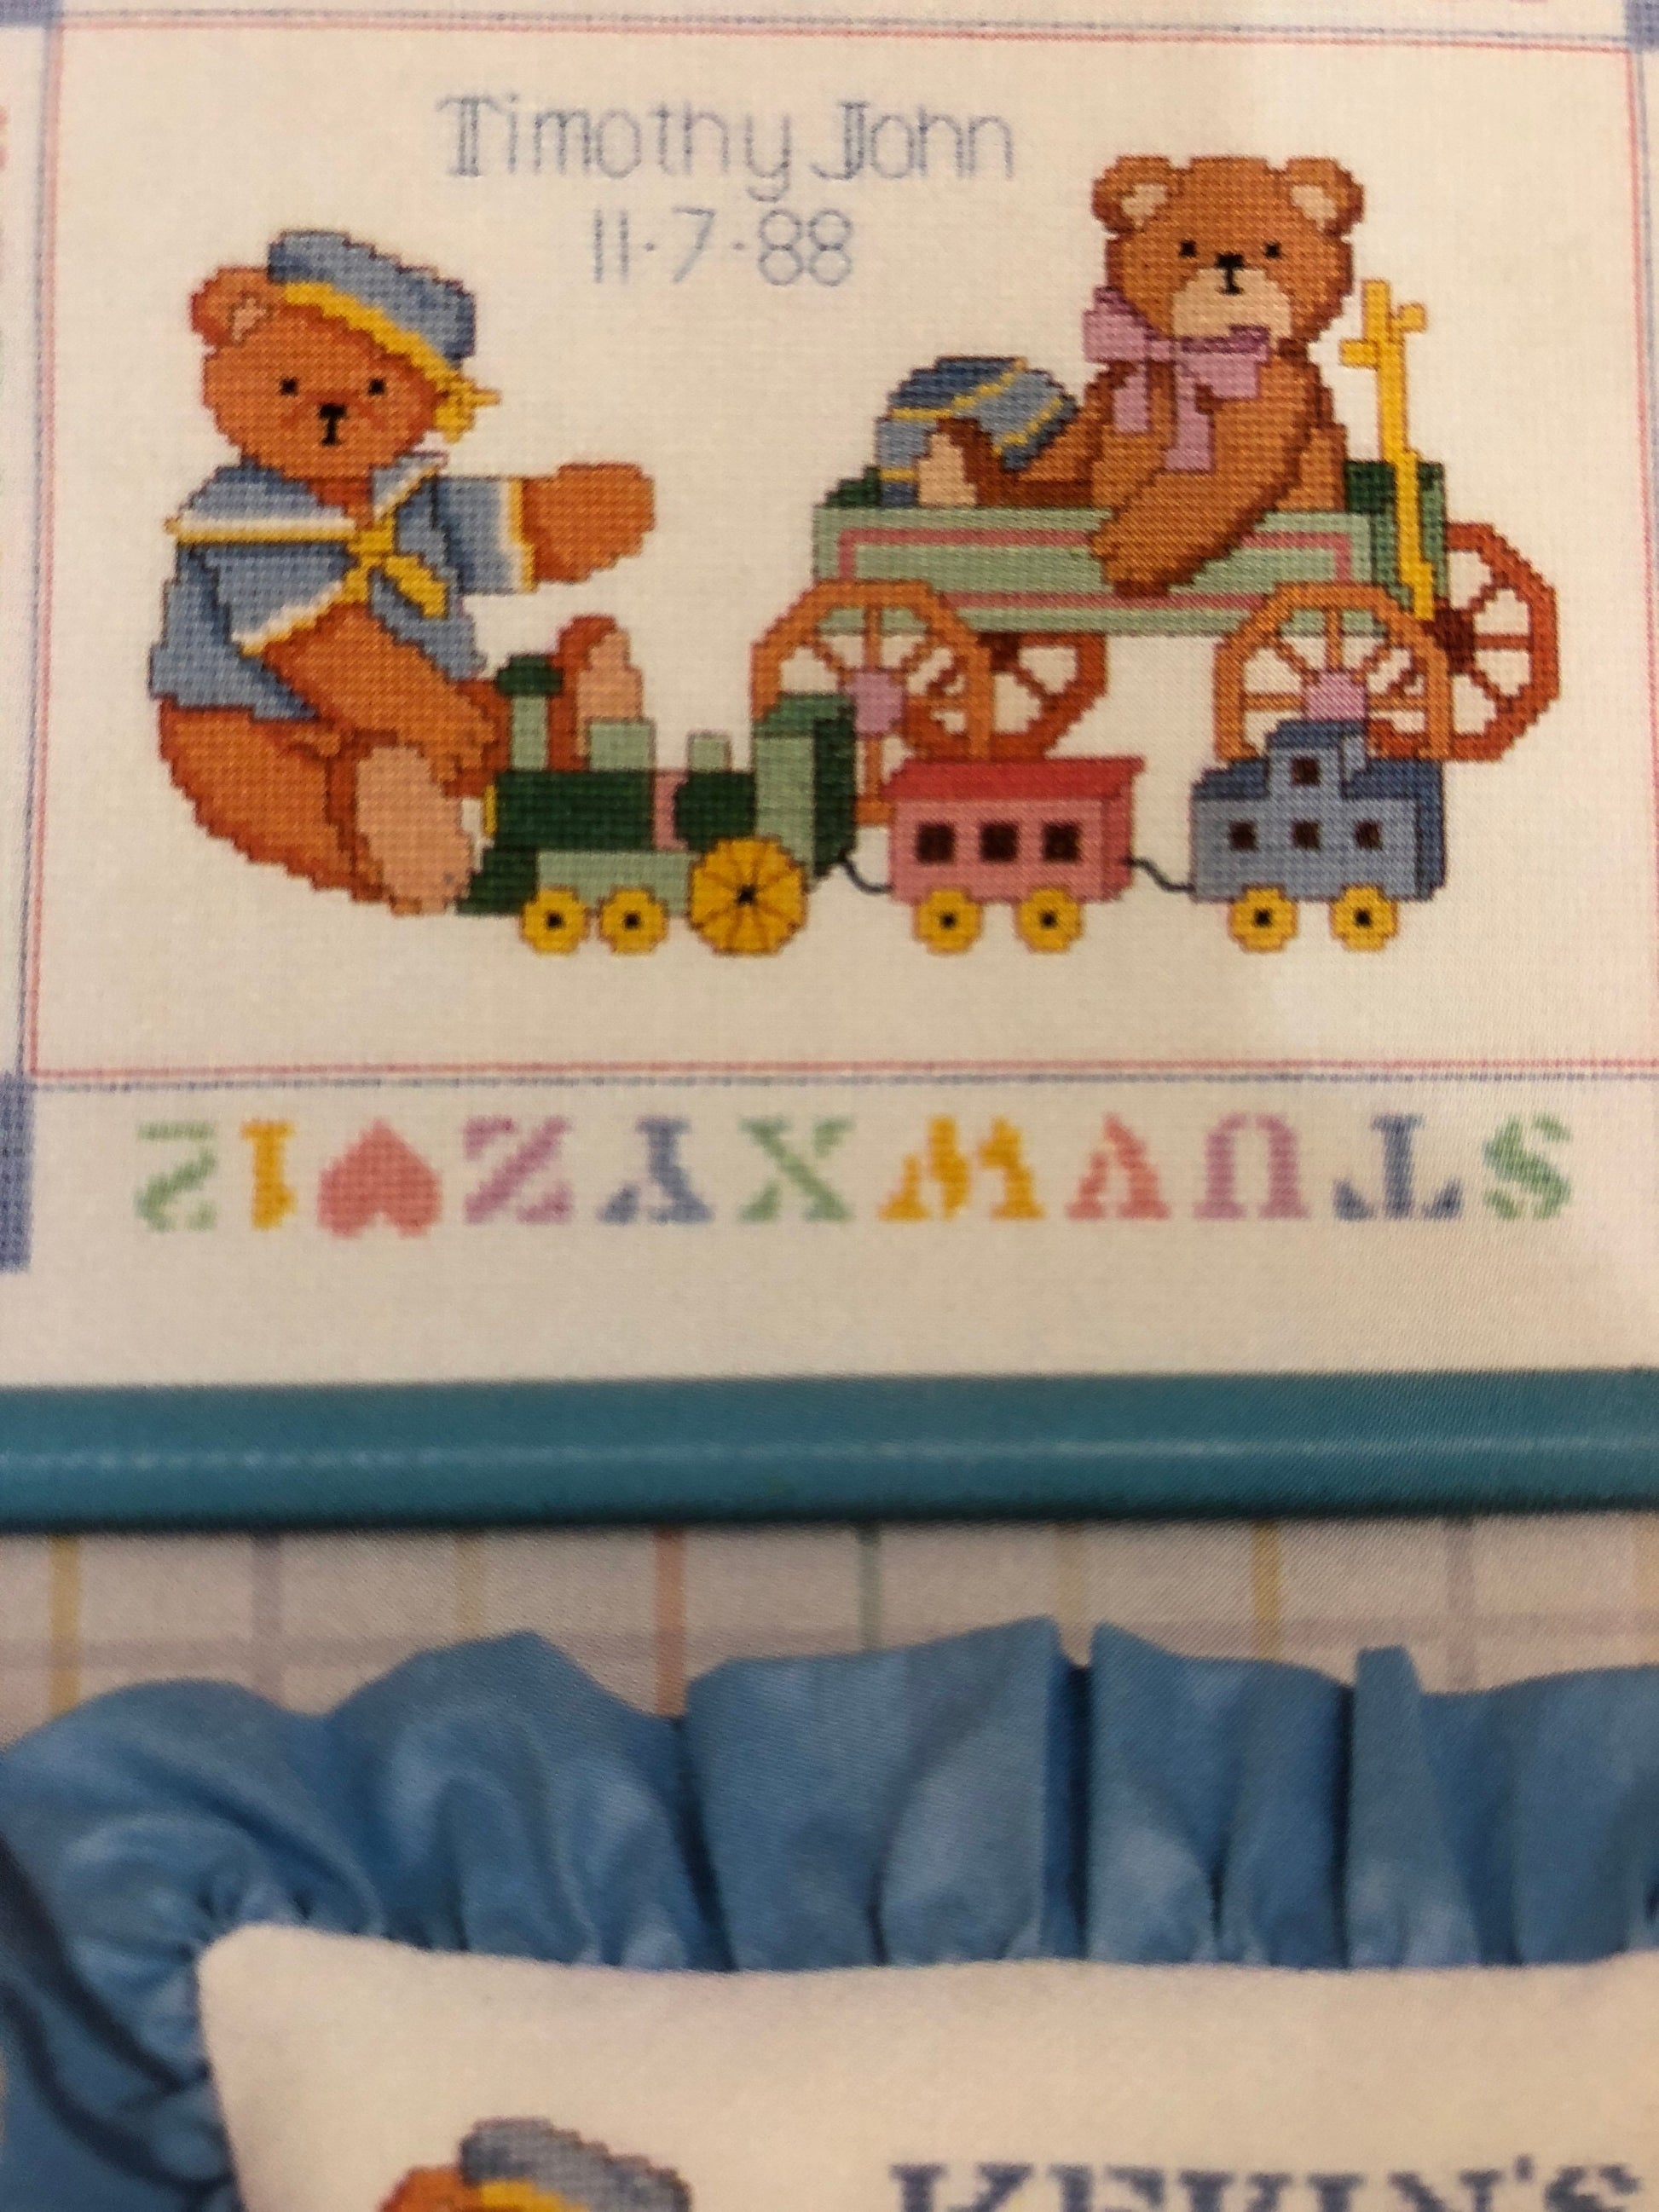 Dimension, Birthday Bears, Vintage 1987, Counted Cross Stitch Pattern Book